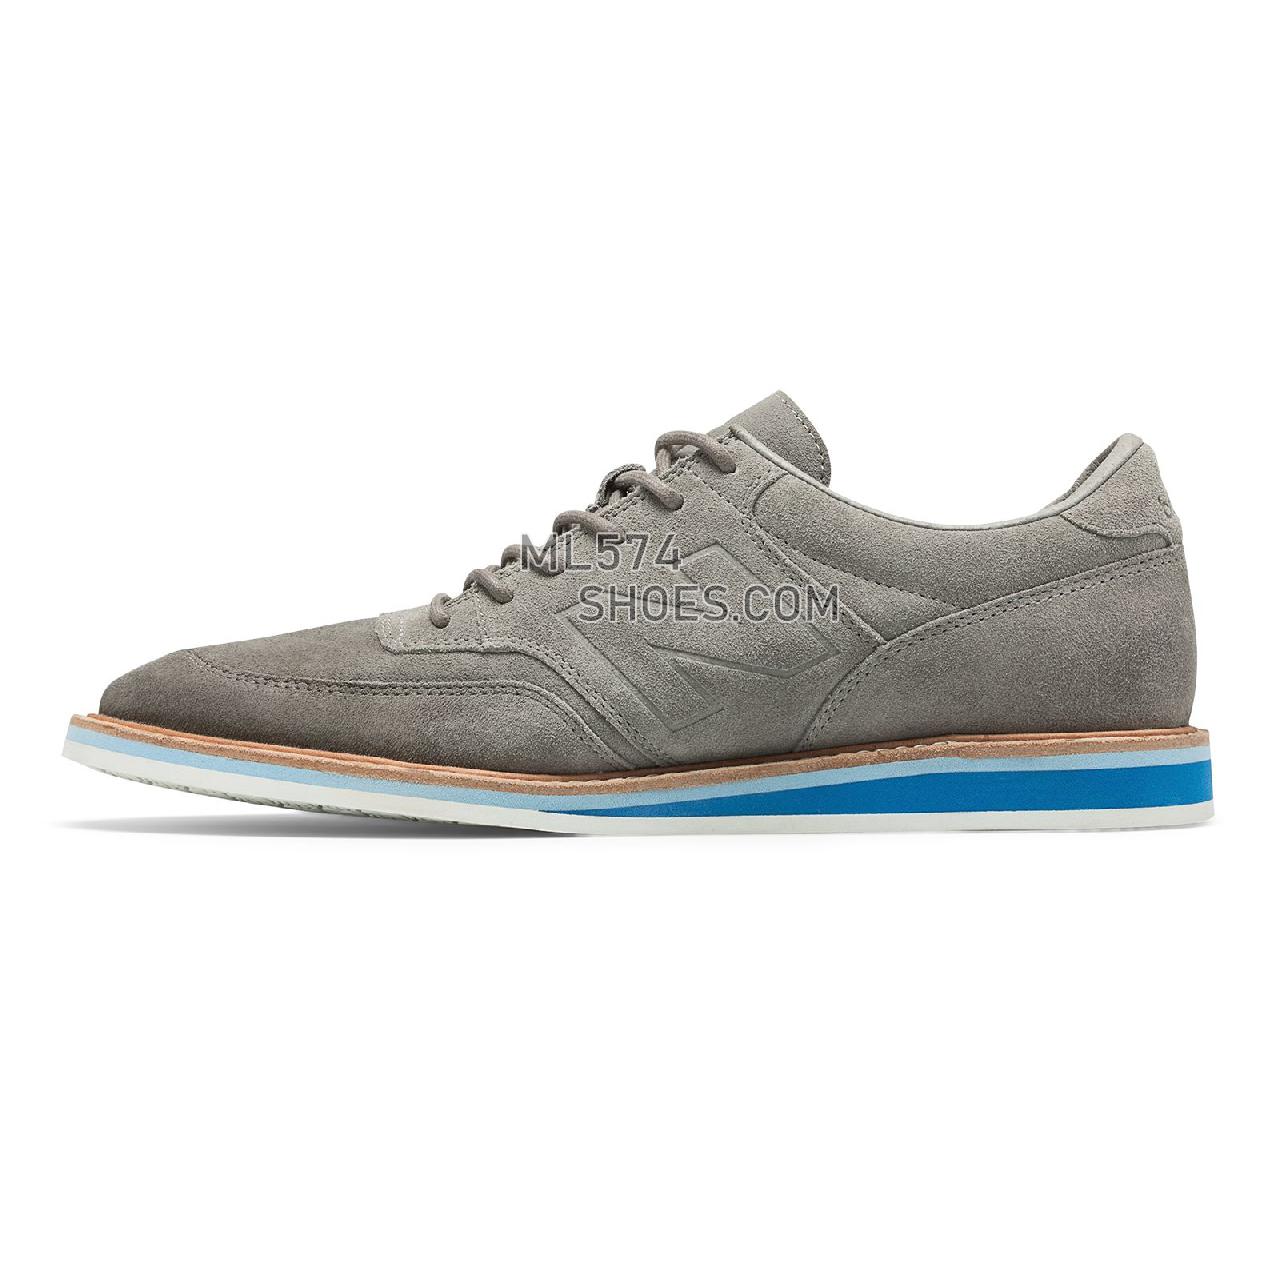 New Balance 1100 - Men's 1100 - Walking Grey with Blue - MD1100GY